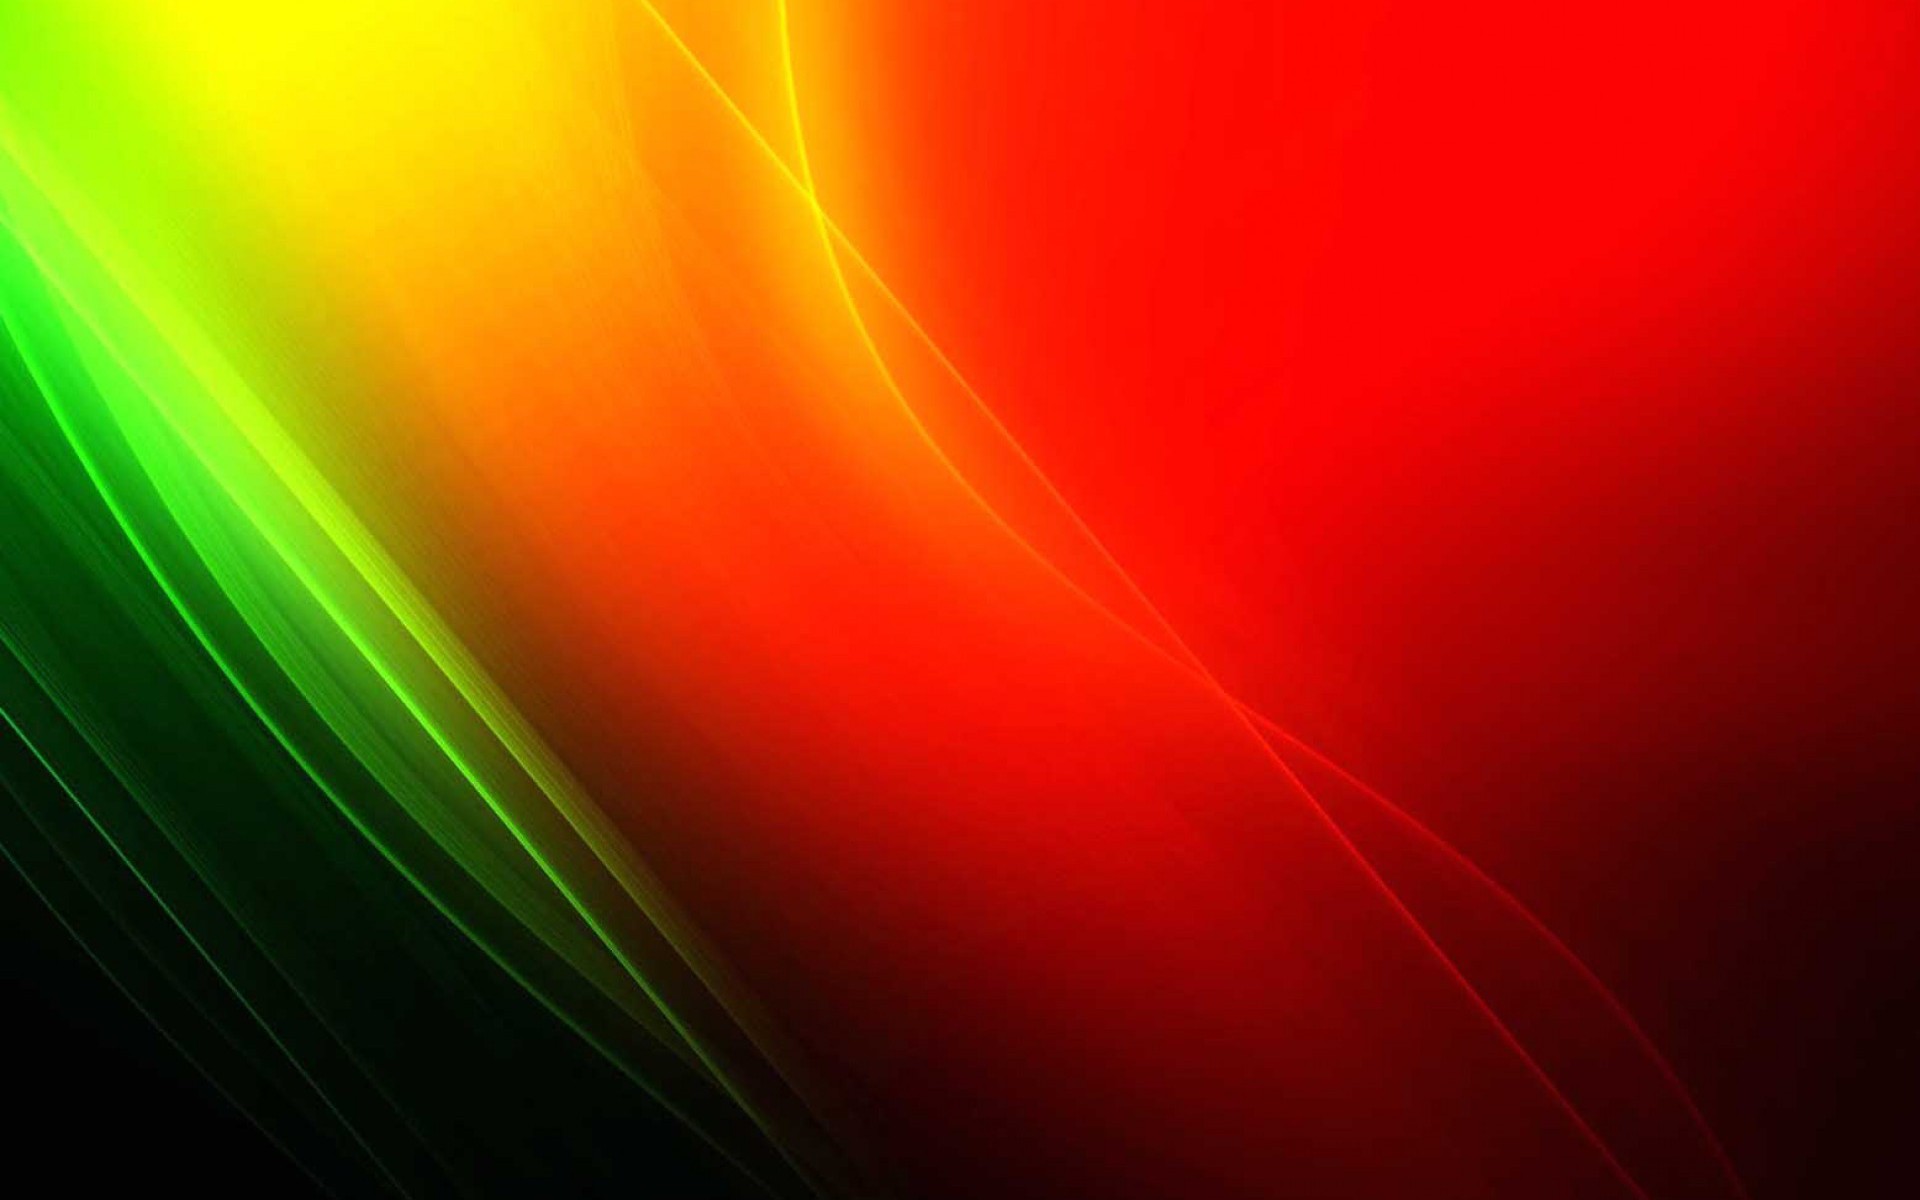 Latest Wallpaper For Samsung Galaxy Tablet - Fondos De Samsung Tablet - HD Wallpaper 